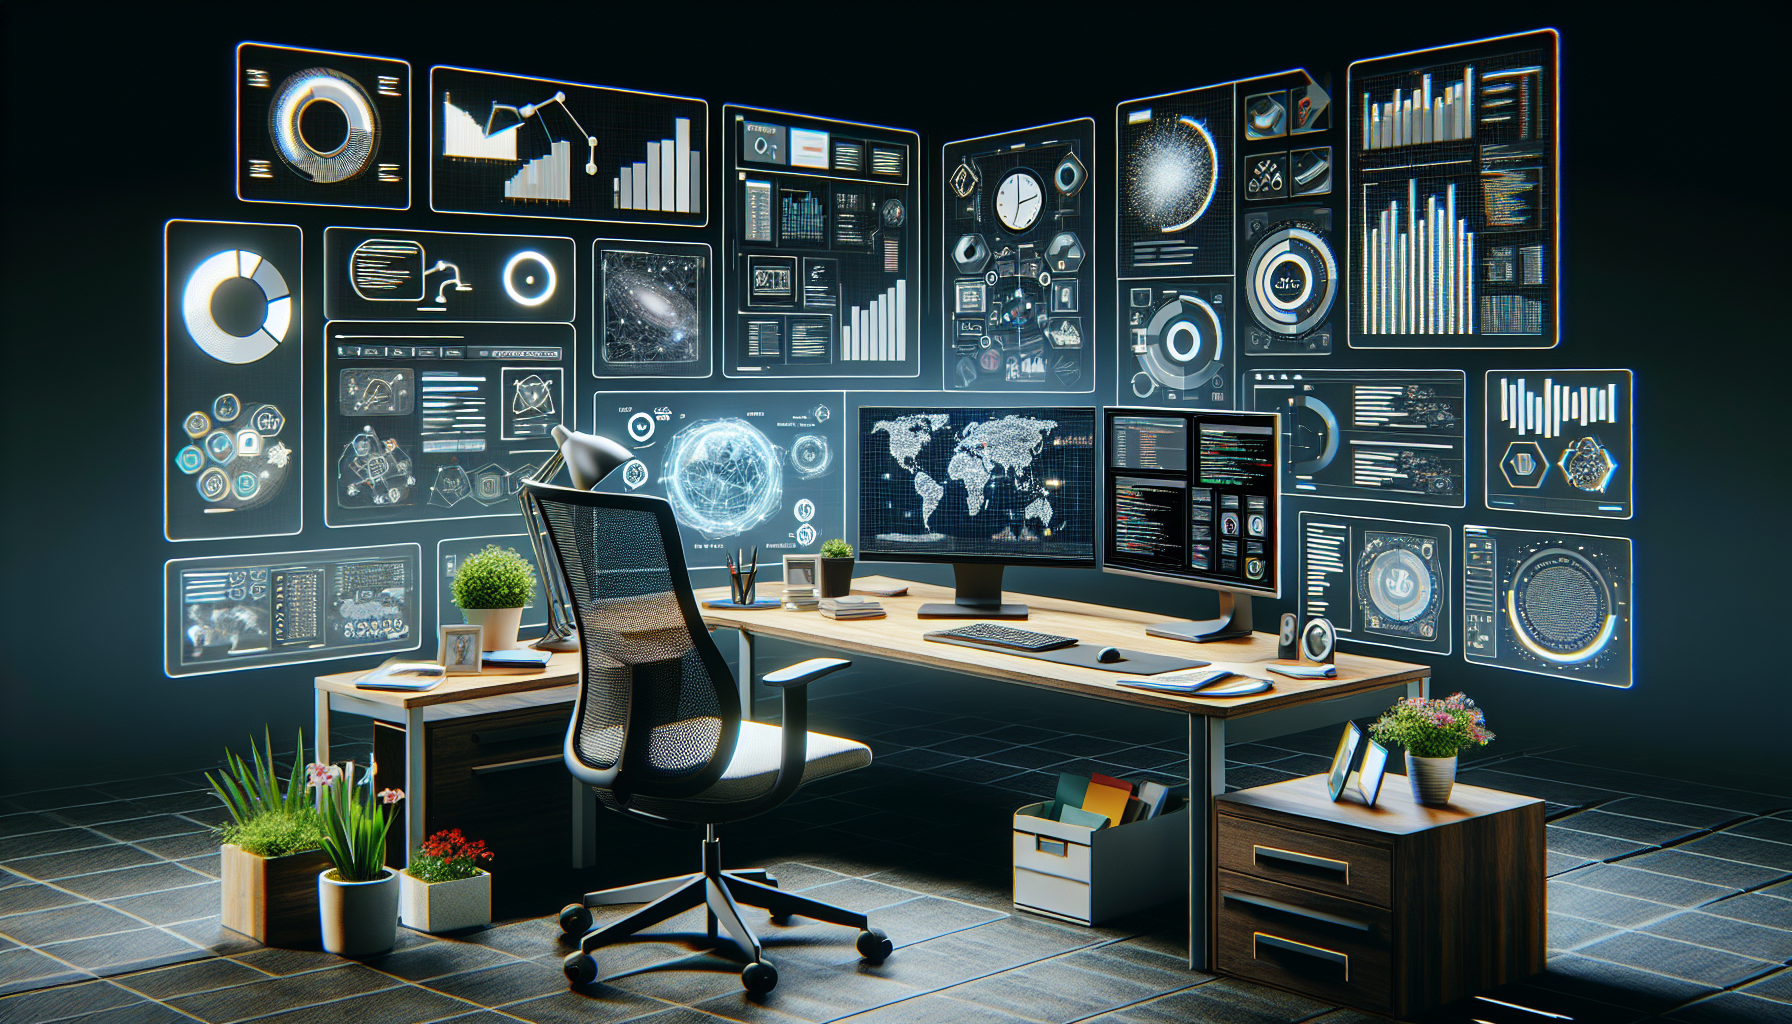 A modern workspace with dual monitors, surrounded by digital charts, graphs, and data visualizations on the walls, featuring various plants and office supplies on a wooden desk with drawers—ideal for web development or analyzing a Flatlogic review of pre-built applications.